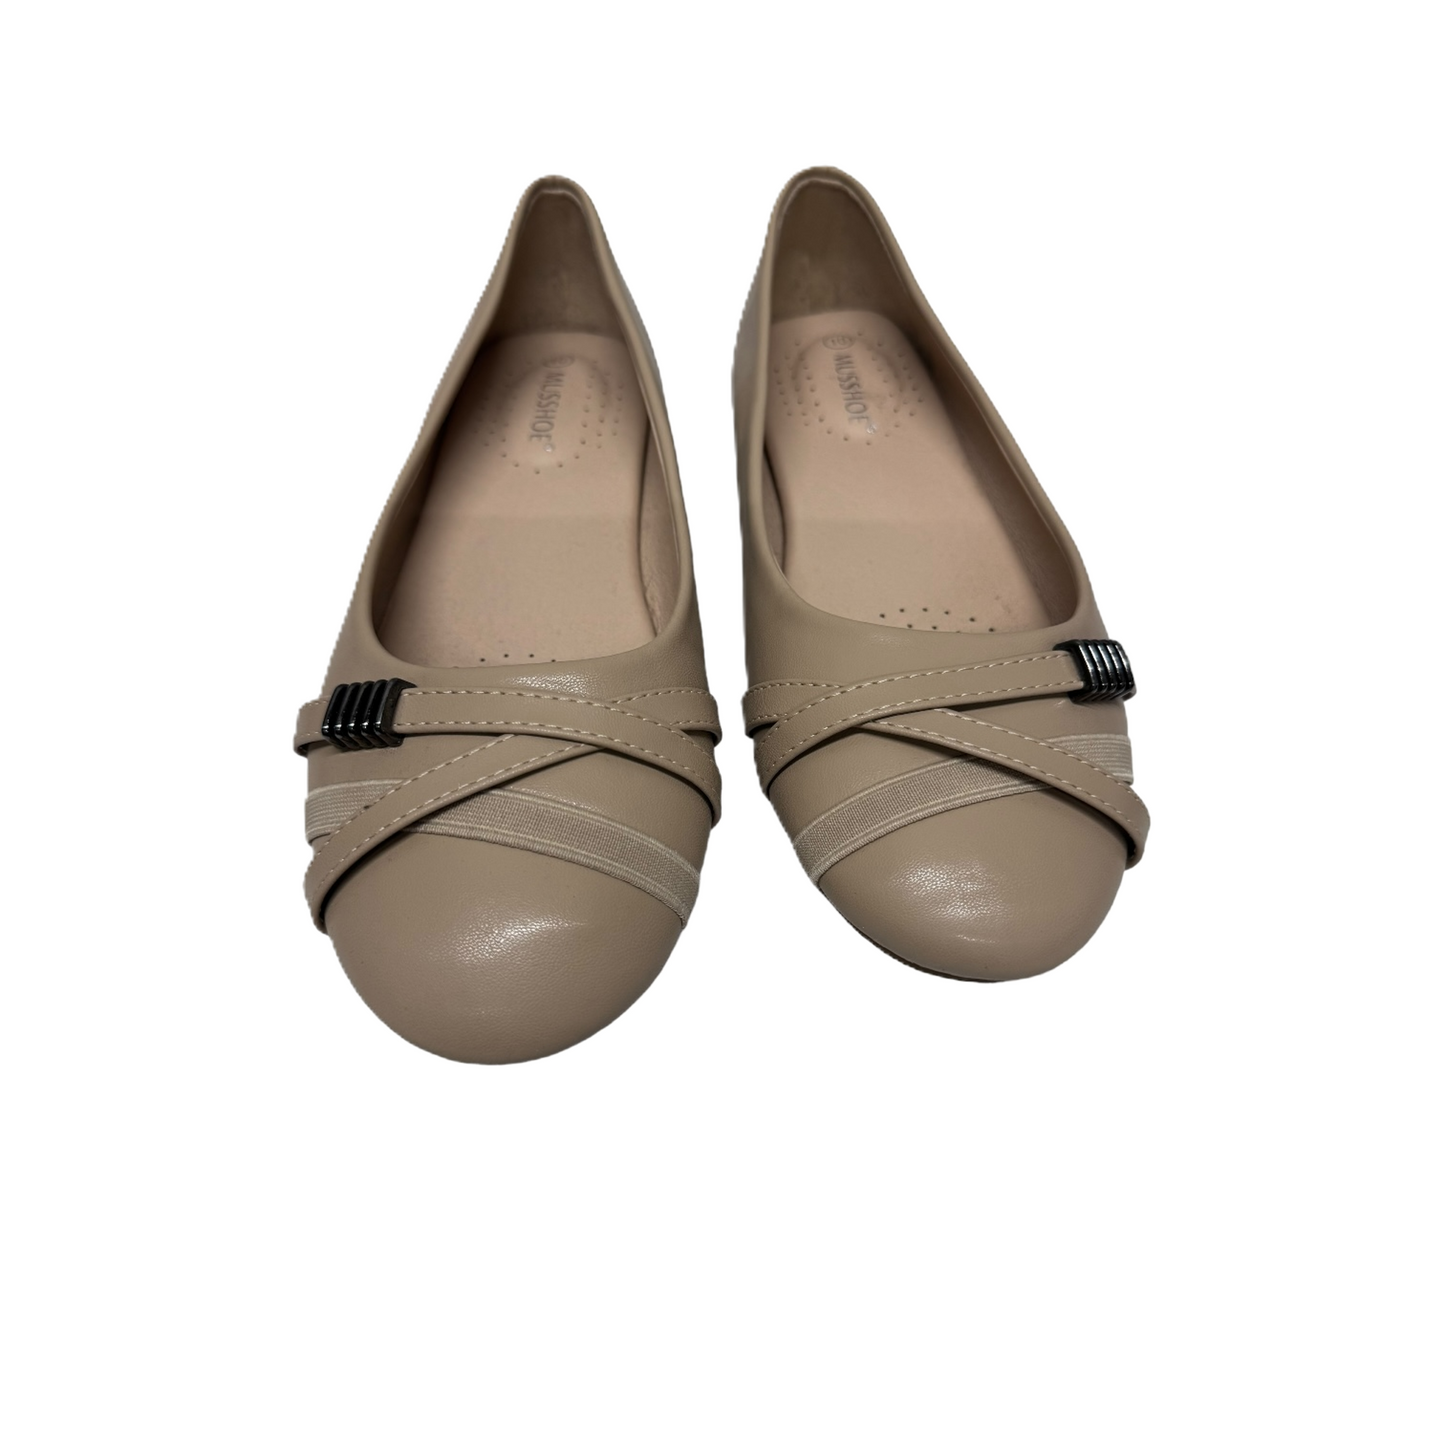 Shoes Flats By musshoe  Size: 10